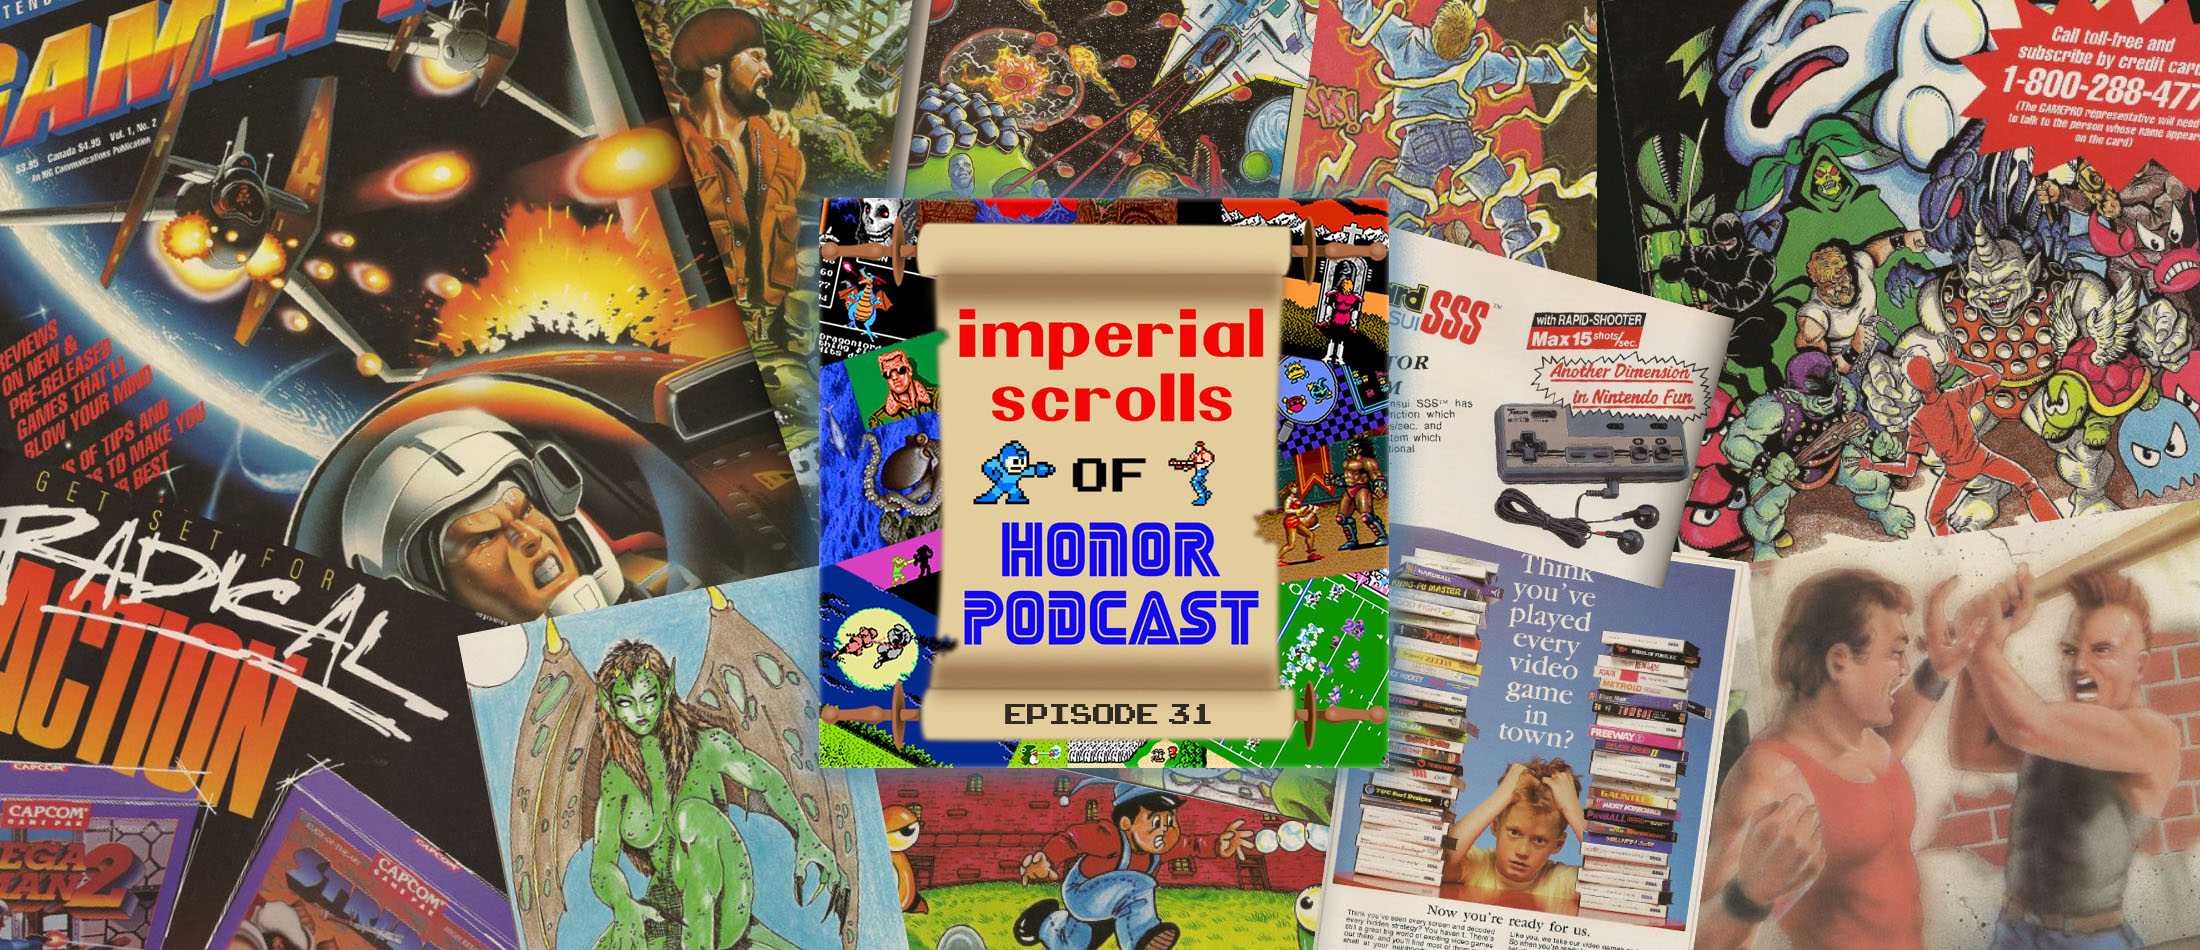 Imperial Scrolls of Honor Podcast - Episode 31 - GamePro #2